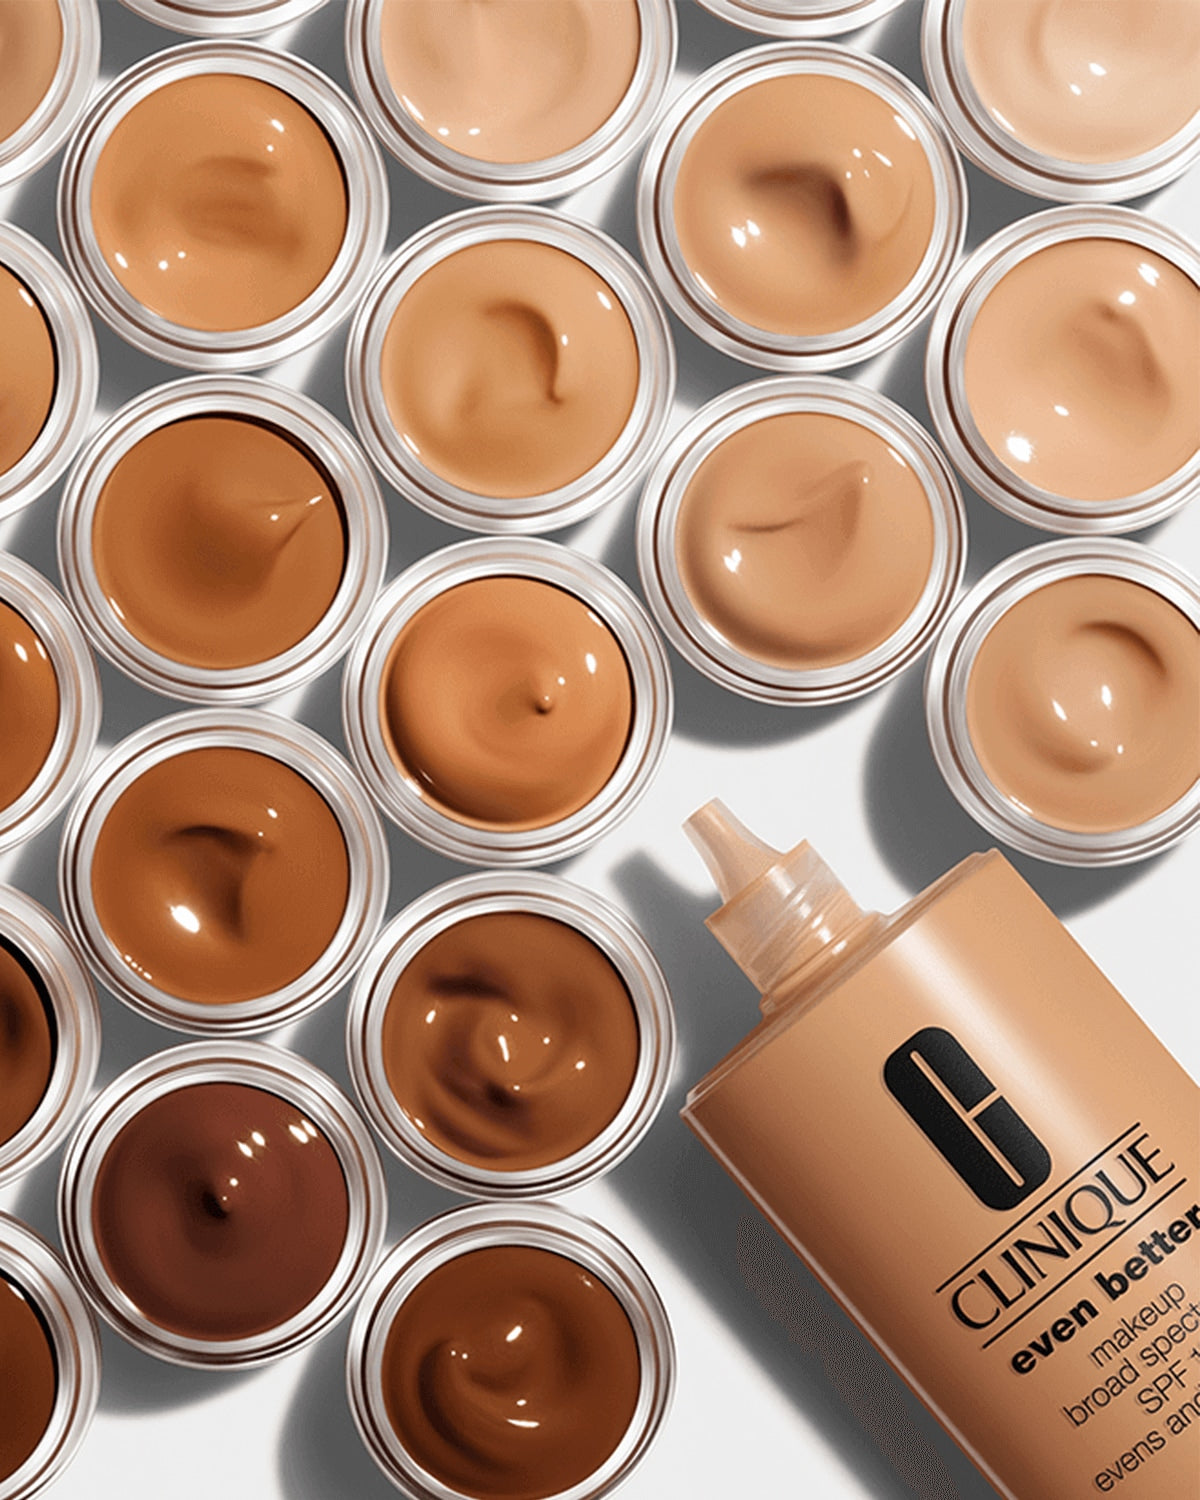 CLINIQUE Even Better Makeup Broad Spectrum Spf15 Evens And Corrects كريم اساس